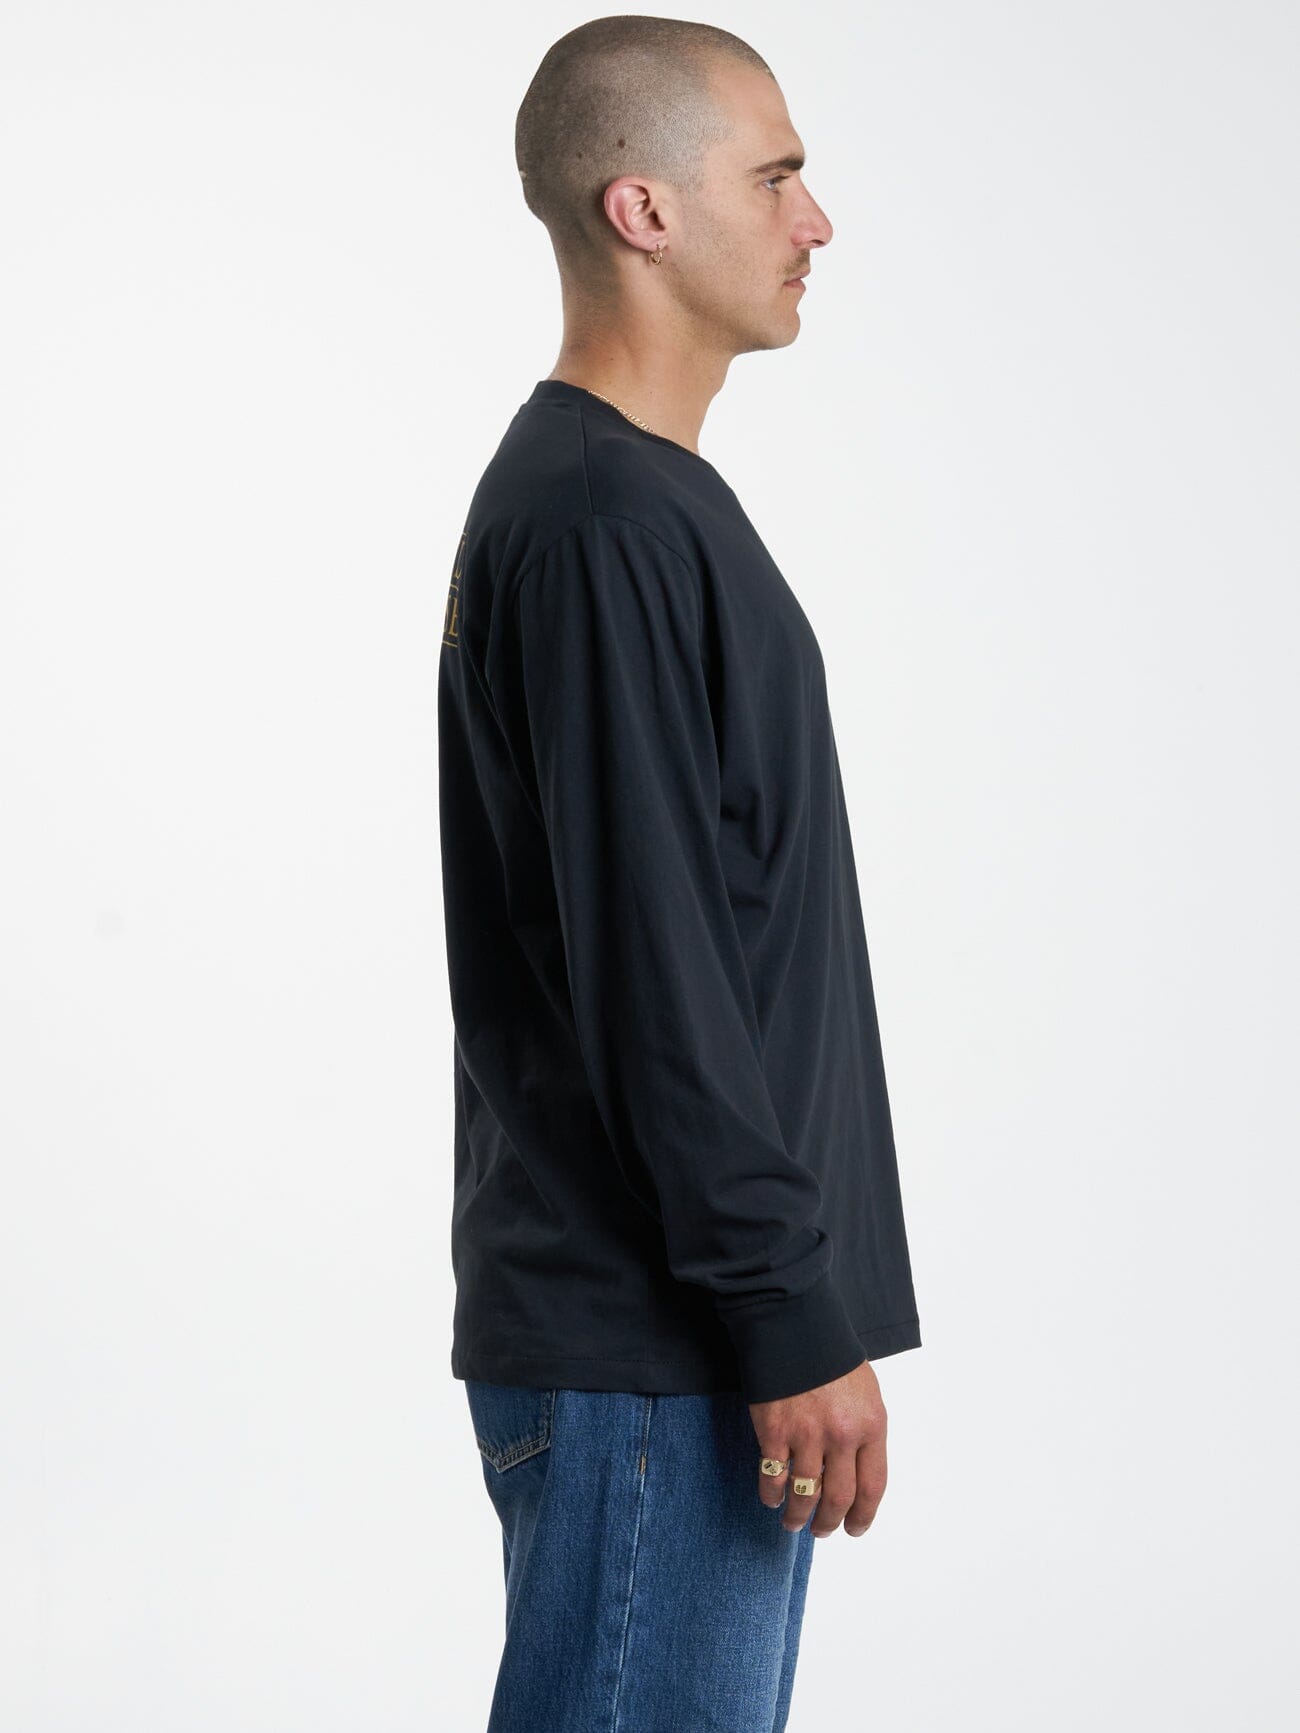 Silence Merch Fit LS Tee - Washed Black